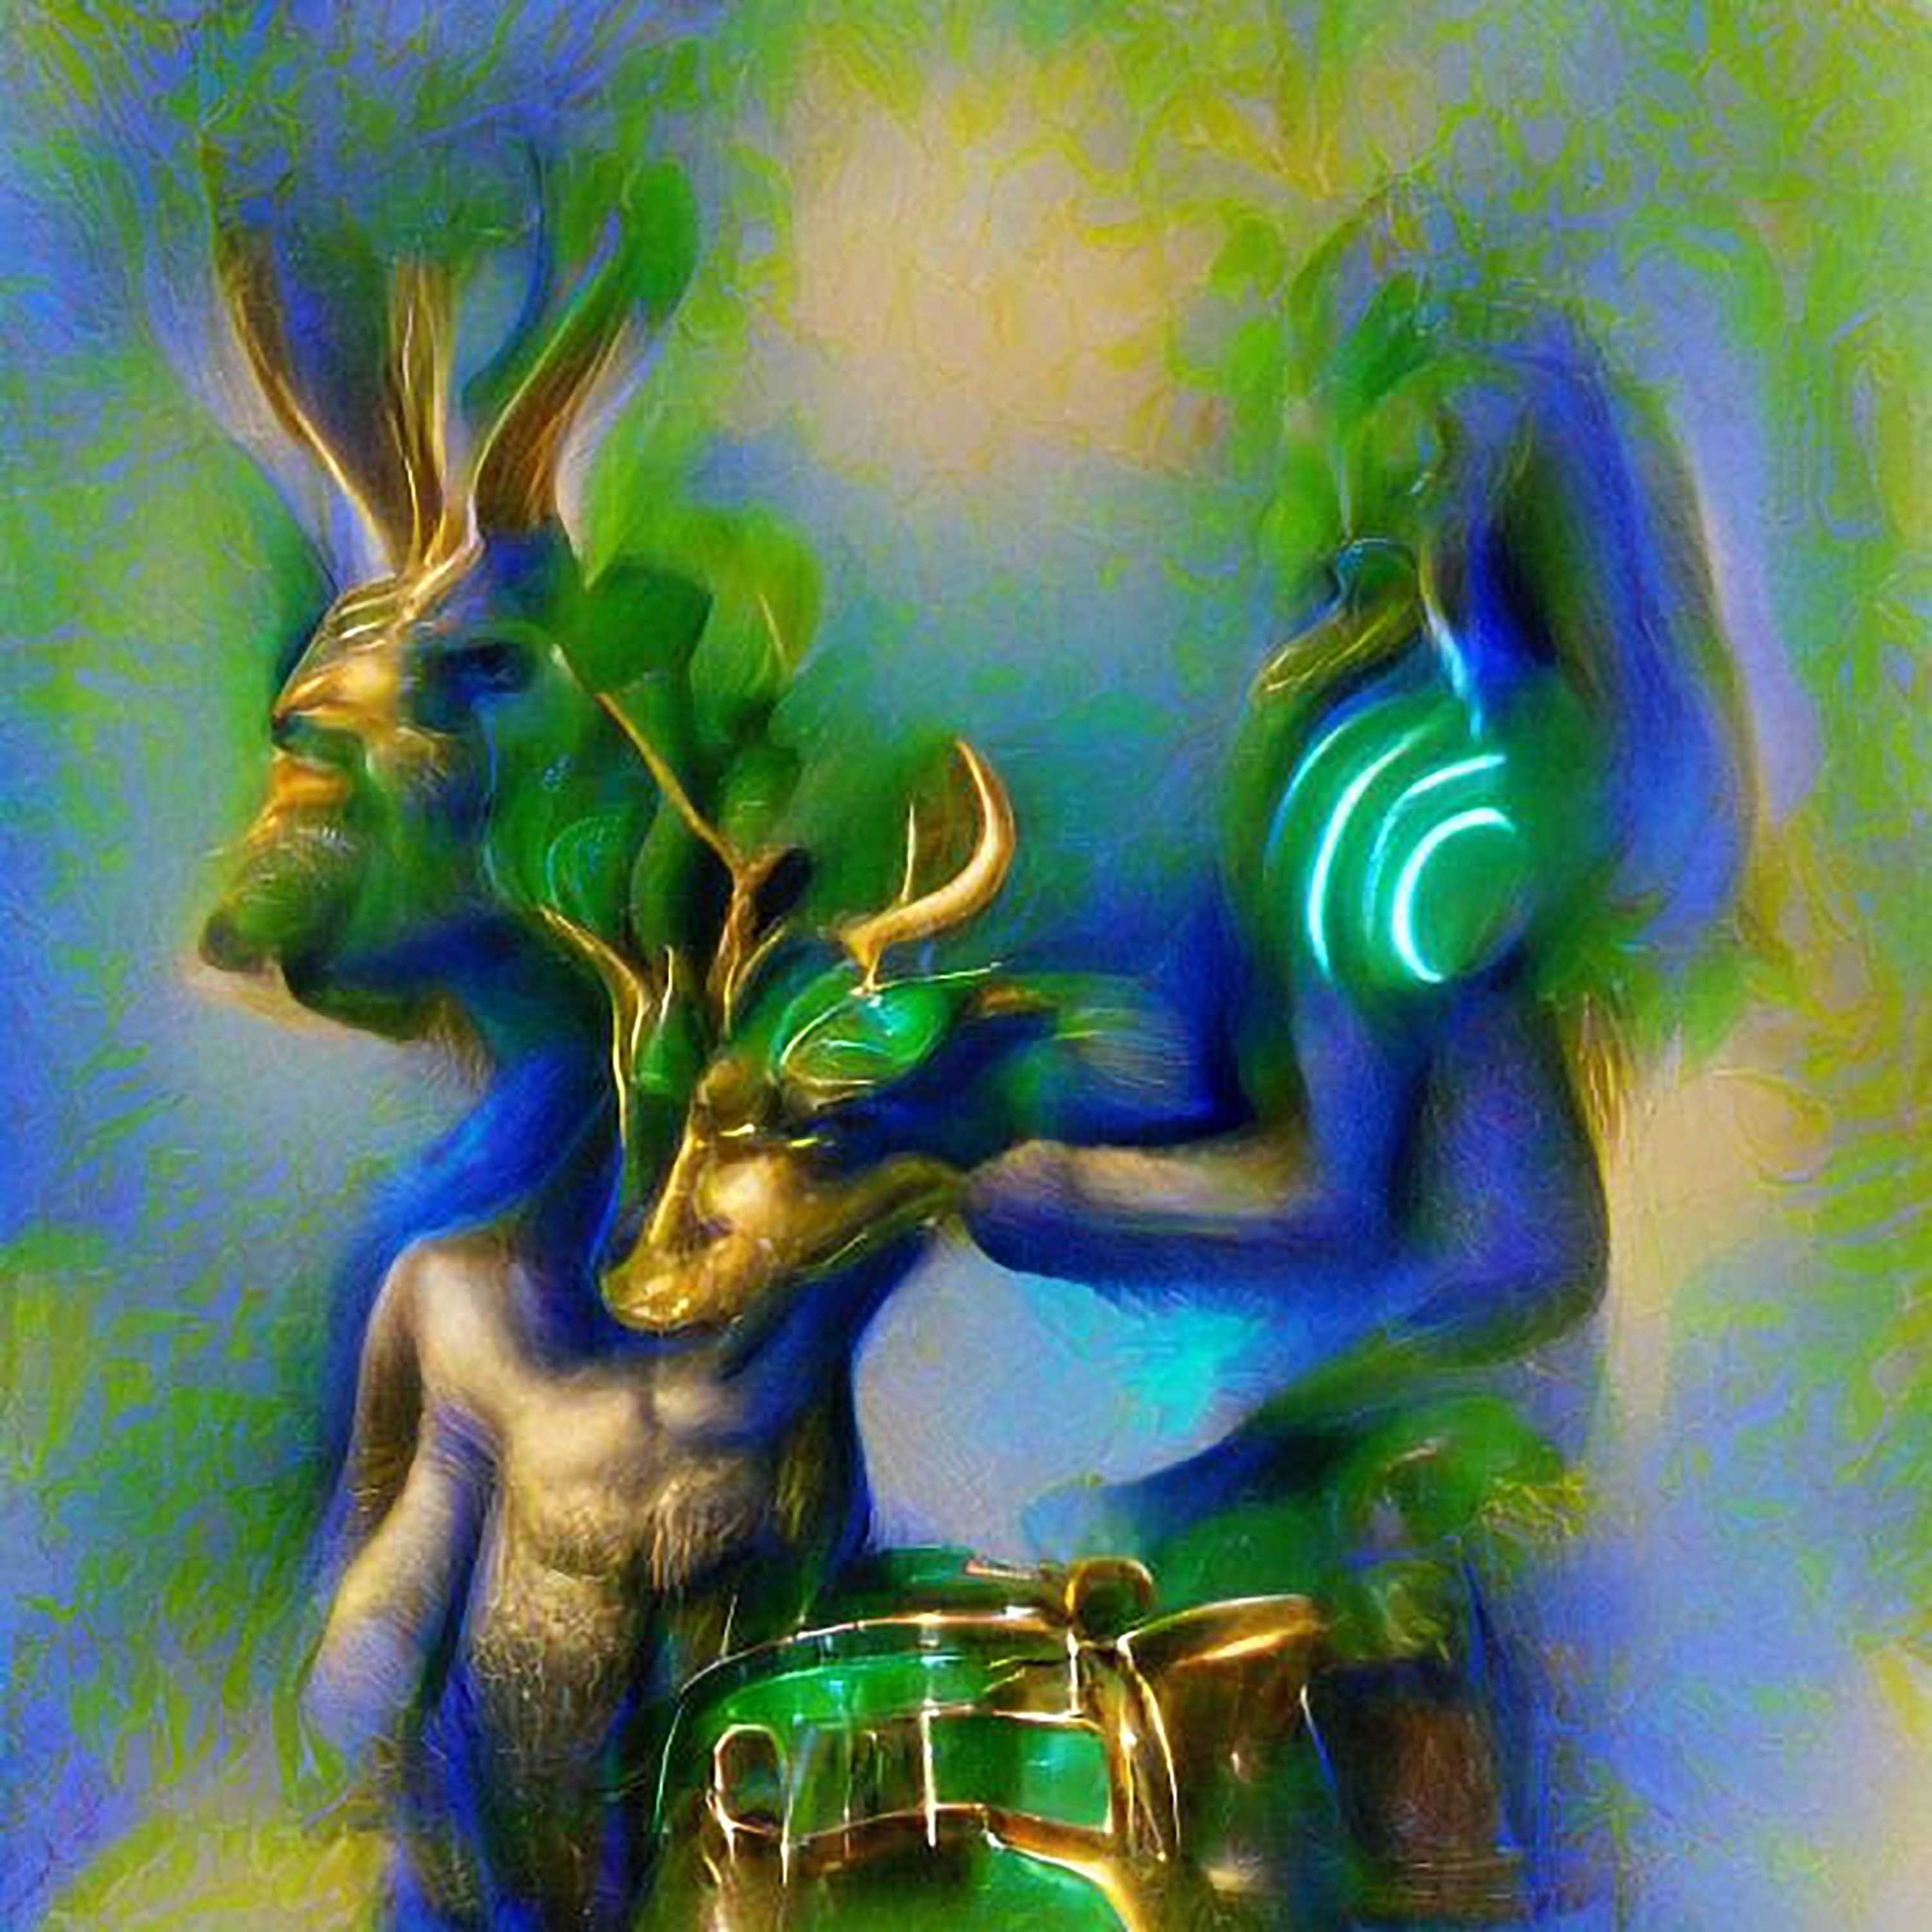 #104 - "We can bend space and time, heart racing rhymes and wordplay that certainly dazzles and has all the Green Lights of Cernunnos and the blue notes of the jazz scale"